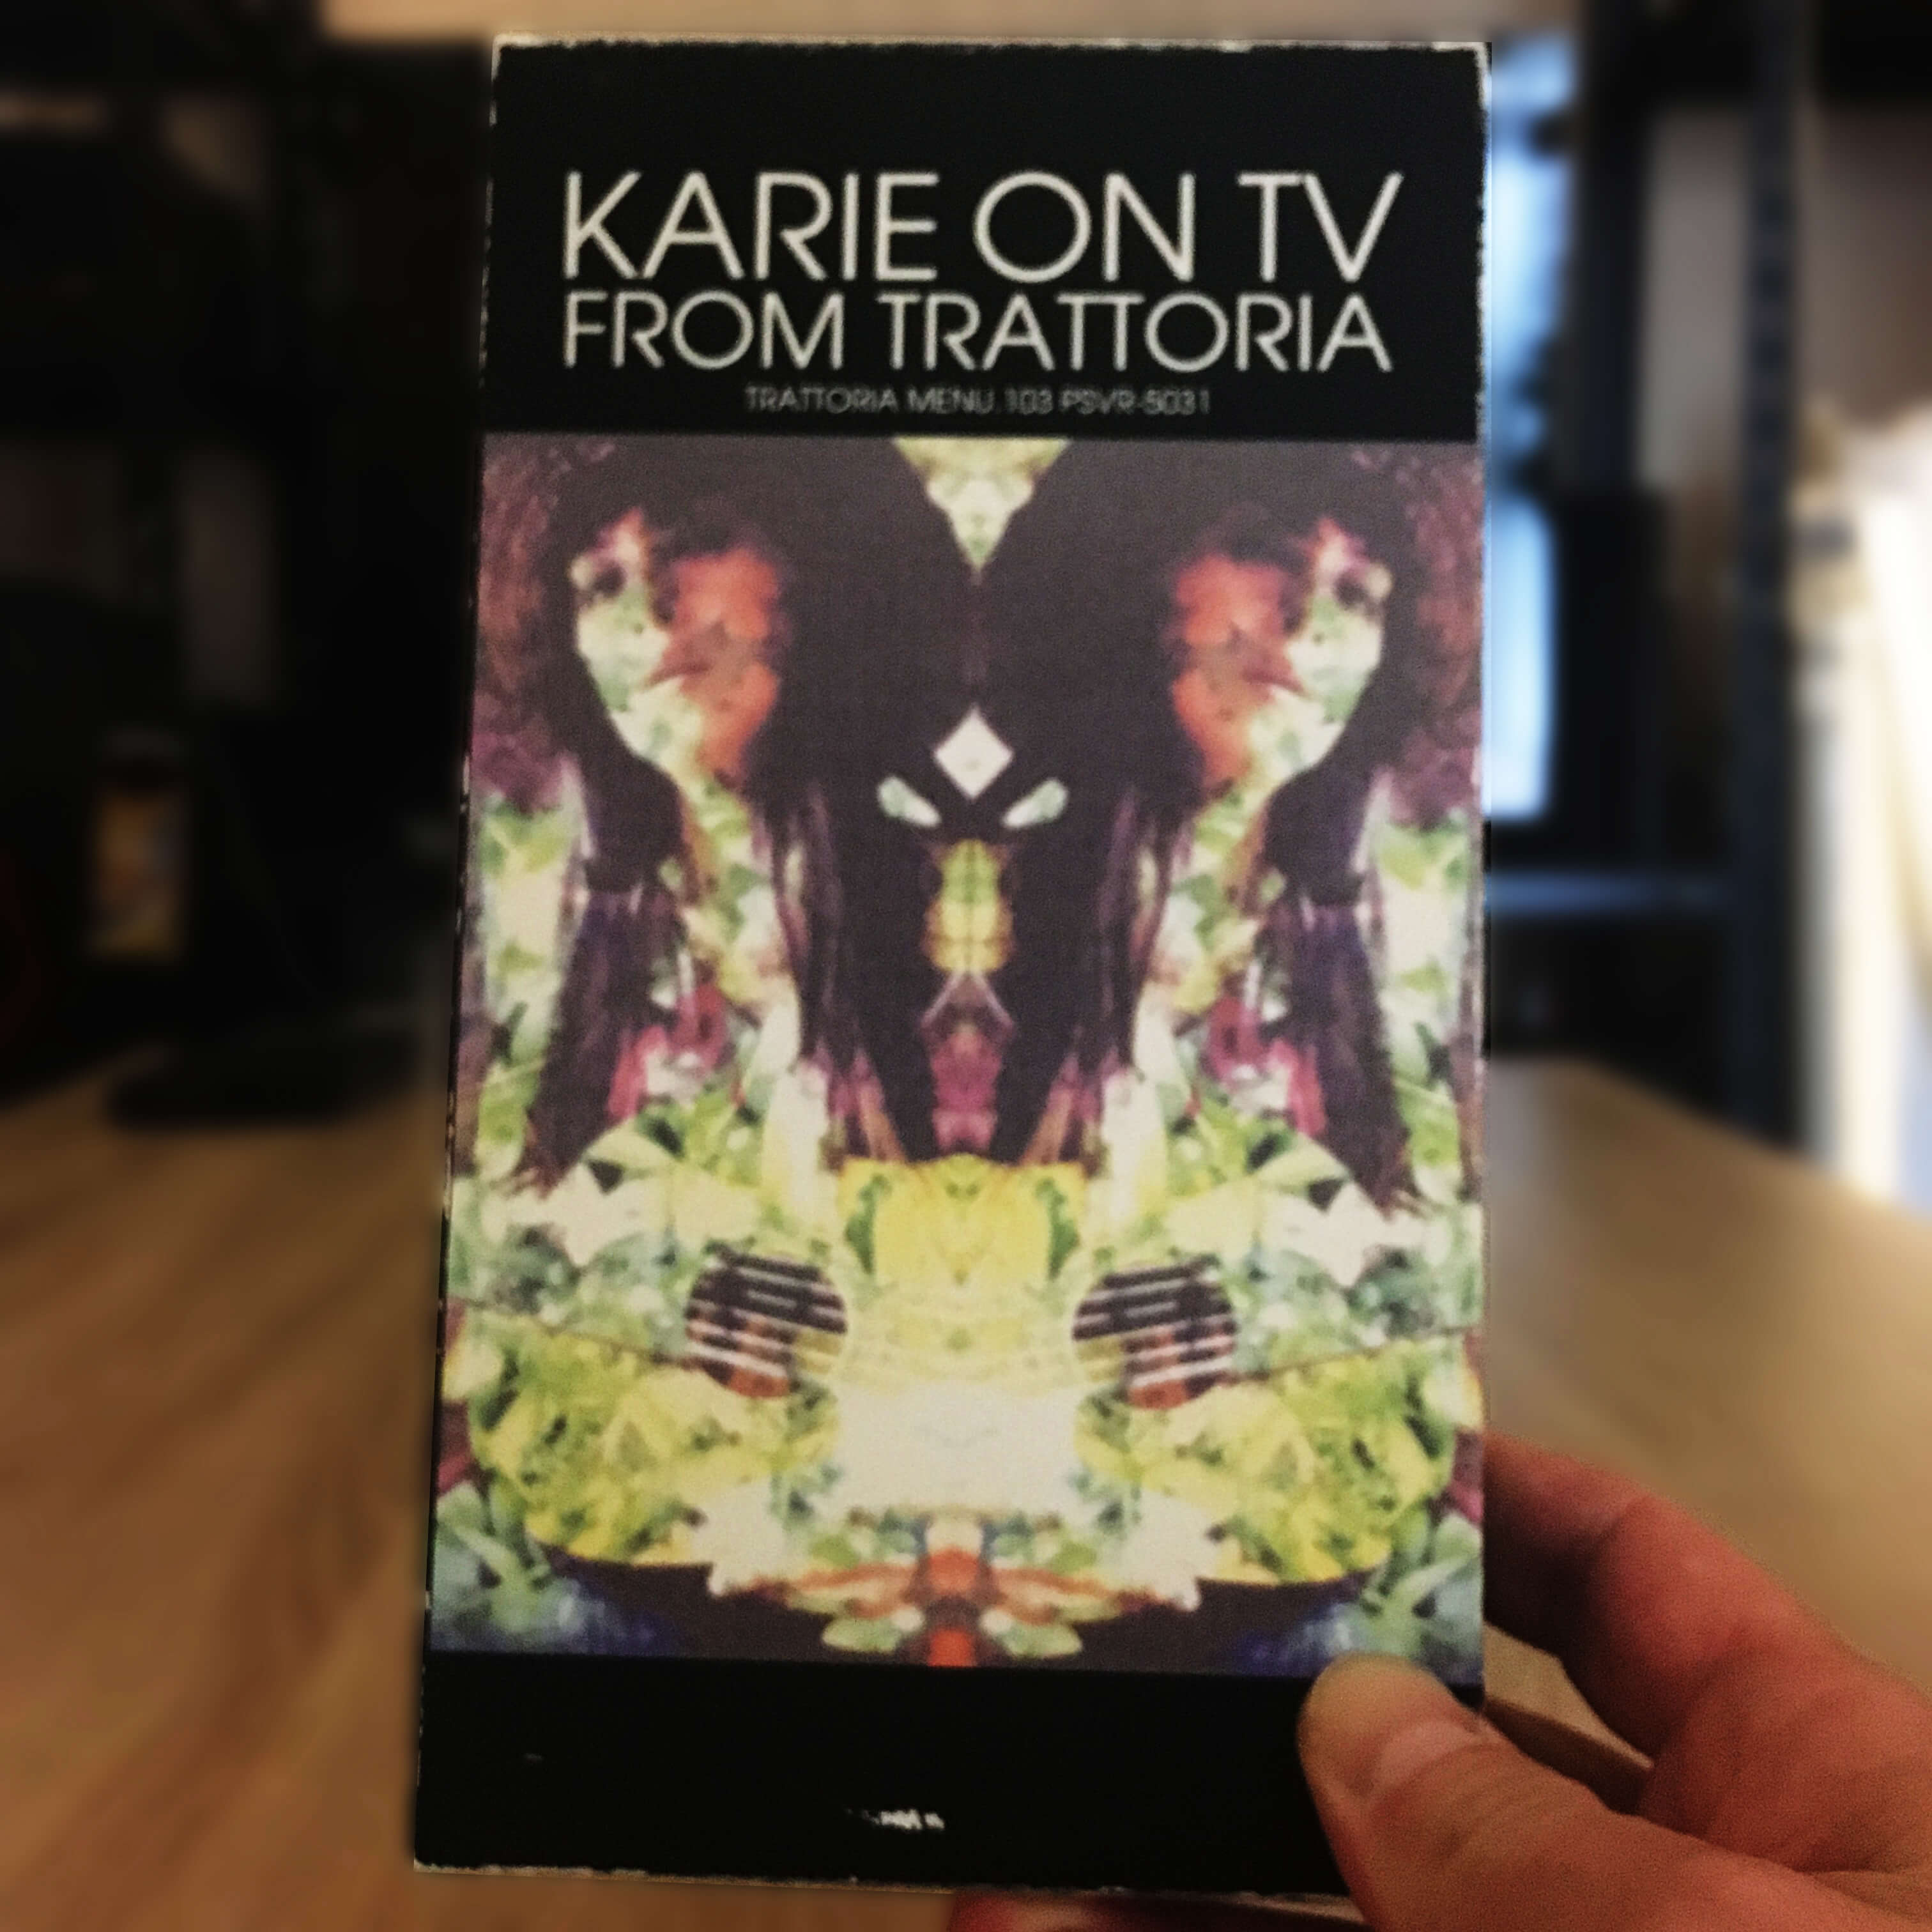 KARIE ON TV FROM TRATTORIA